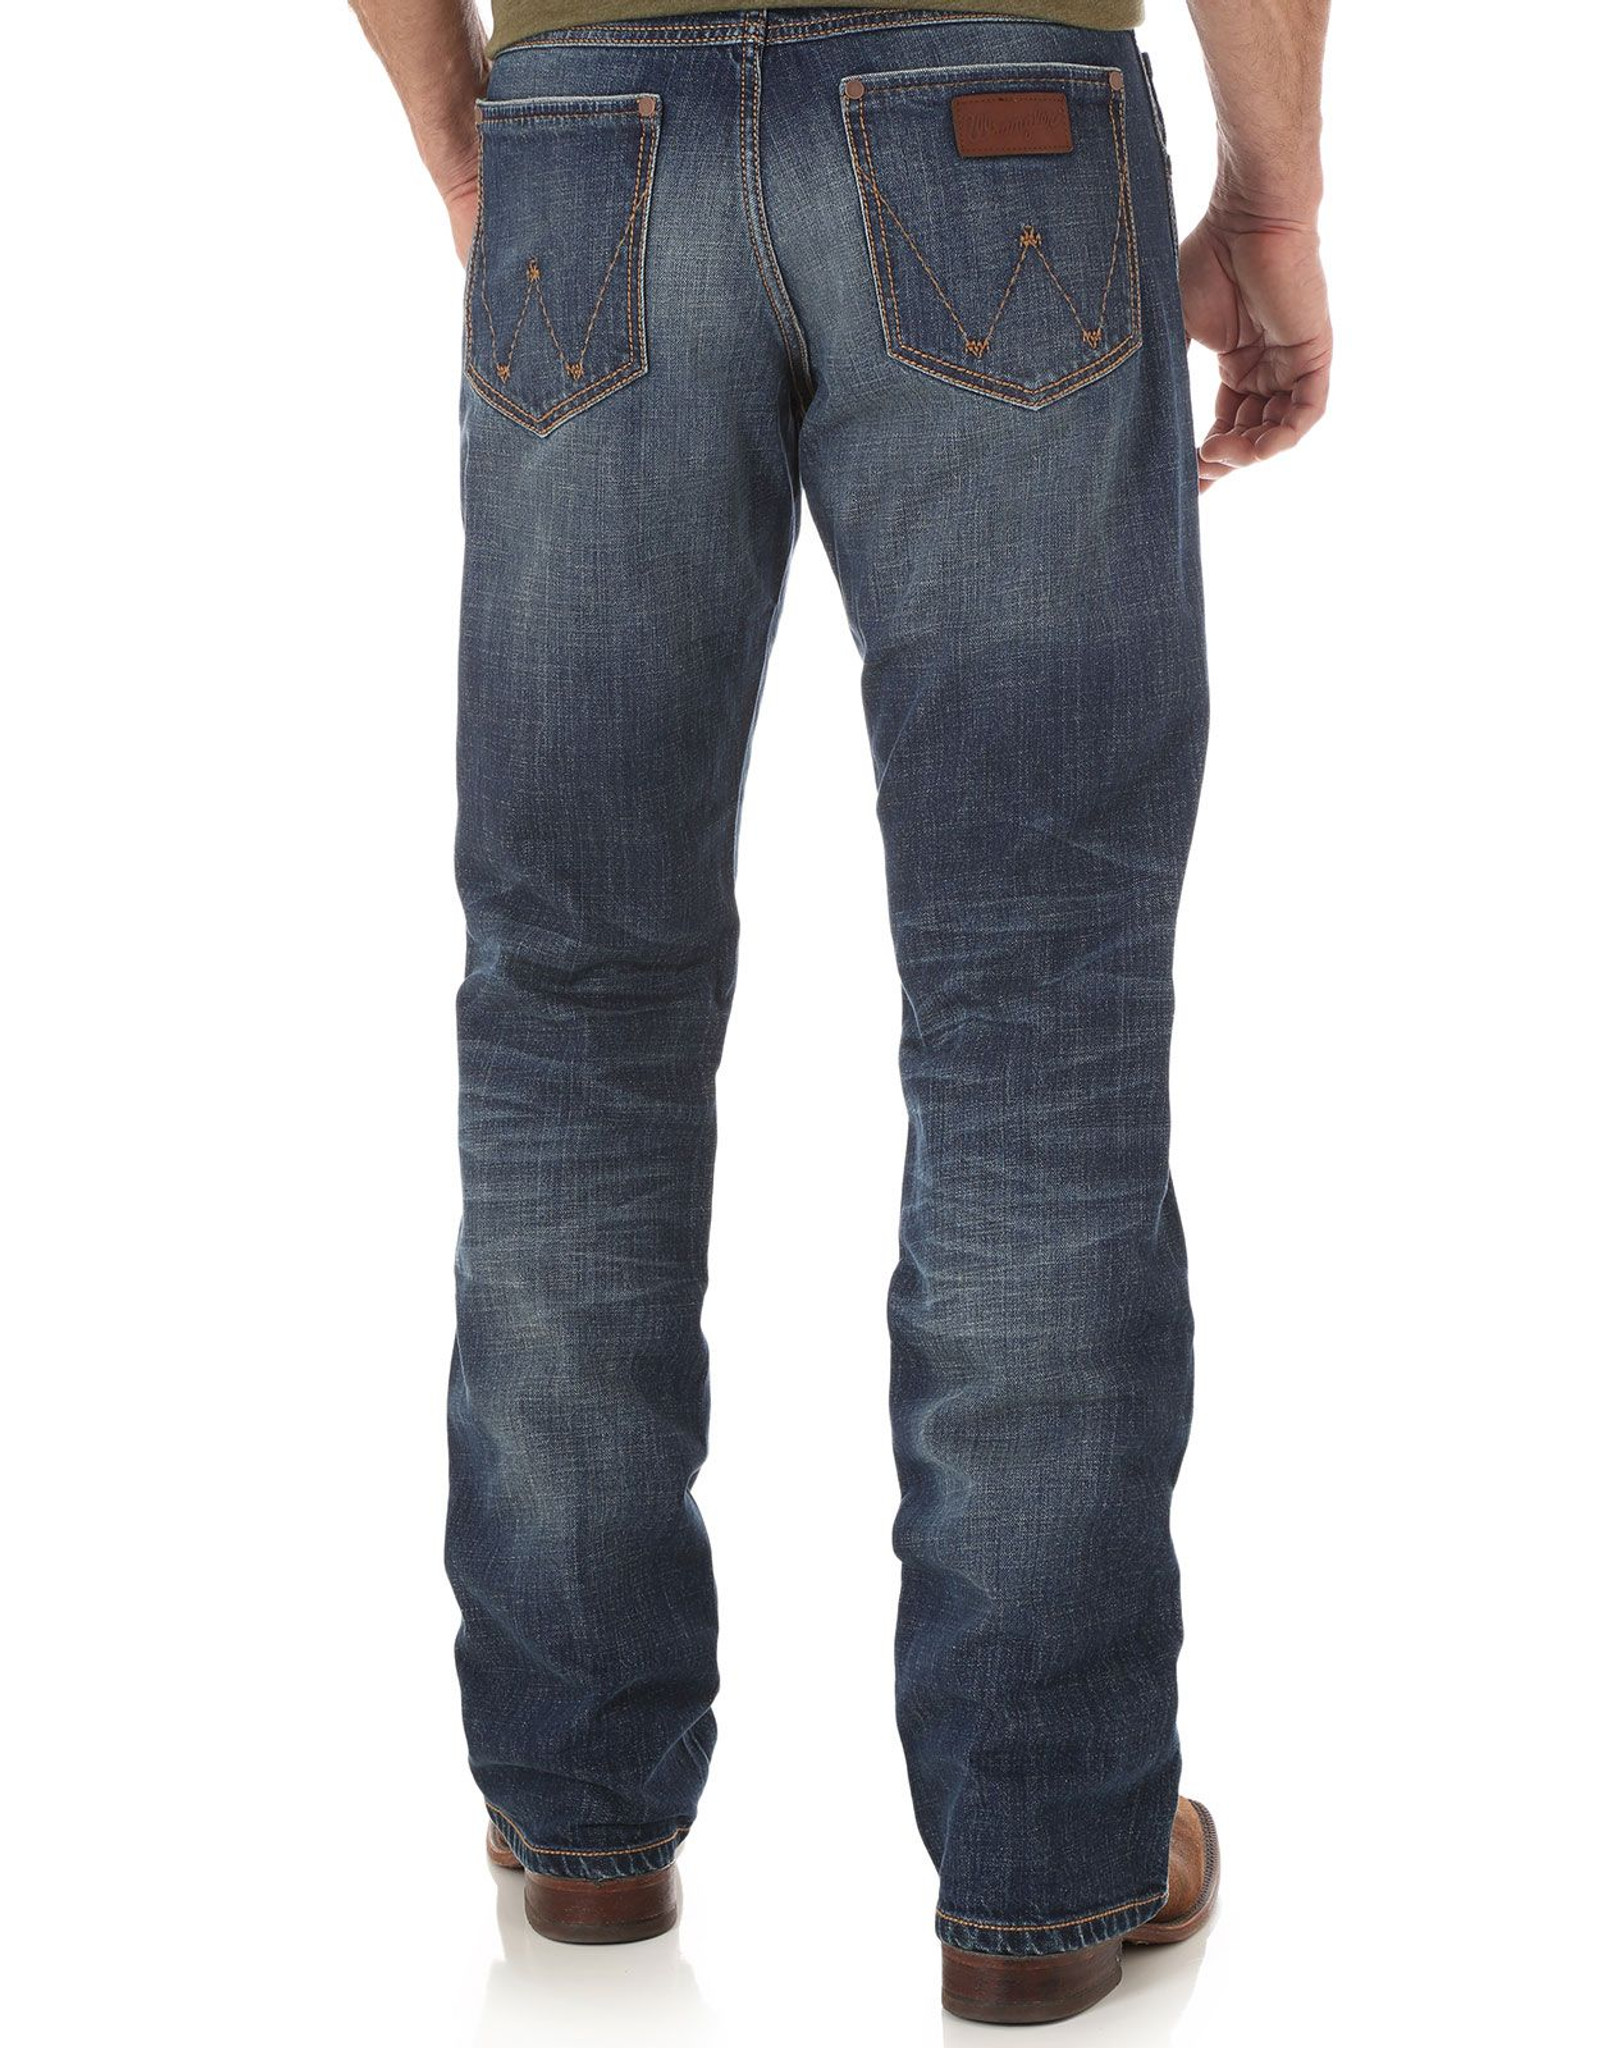 Wrangler Retro Relaxed Boot Cut Jeans from Langston's